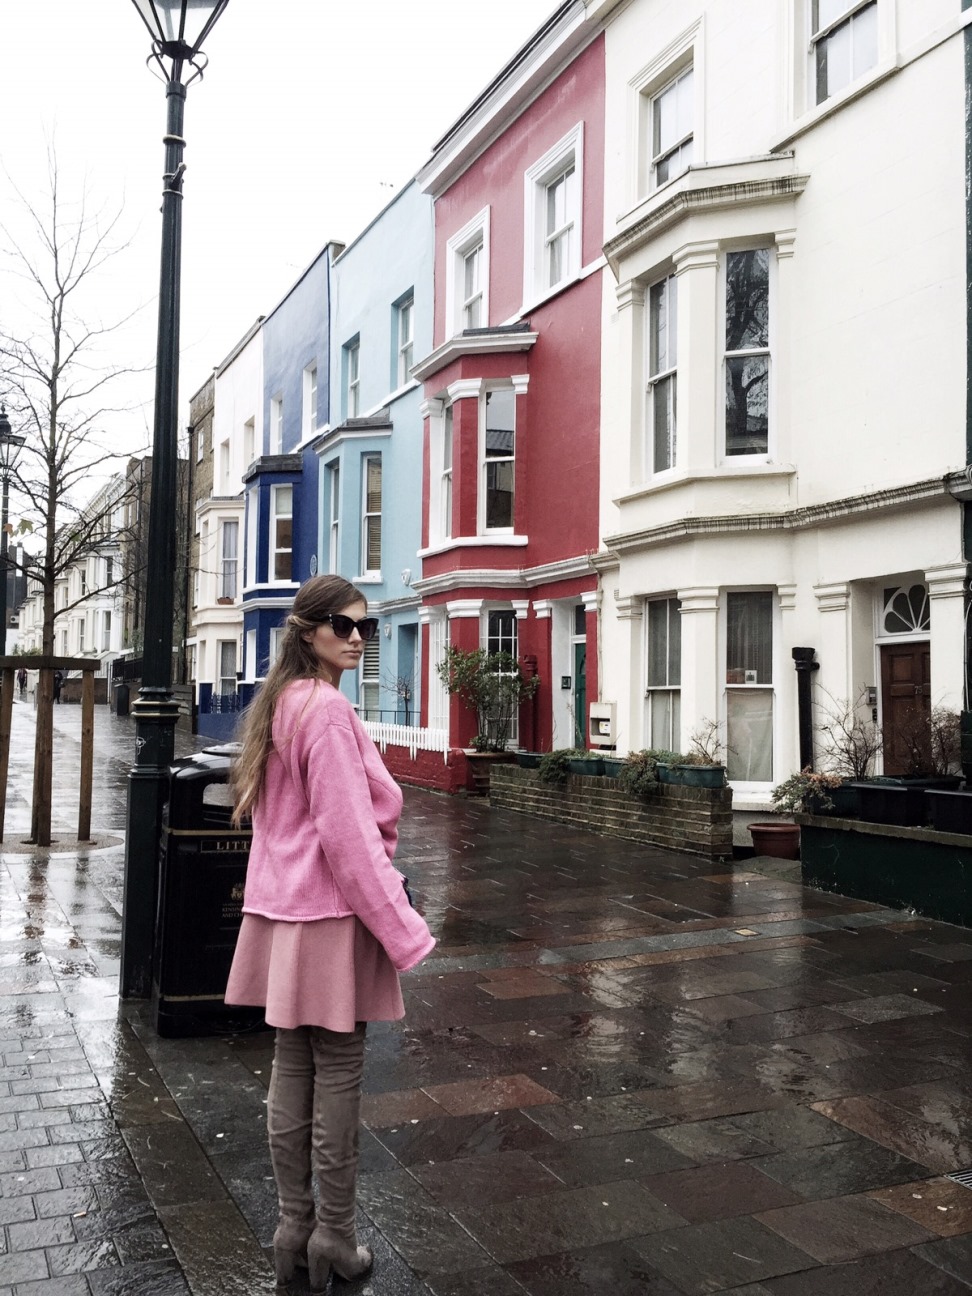 London Travel Guide - Notting Hill